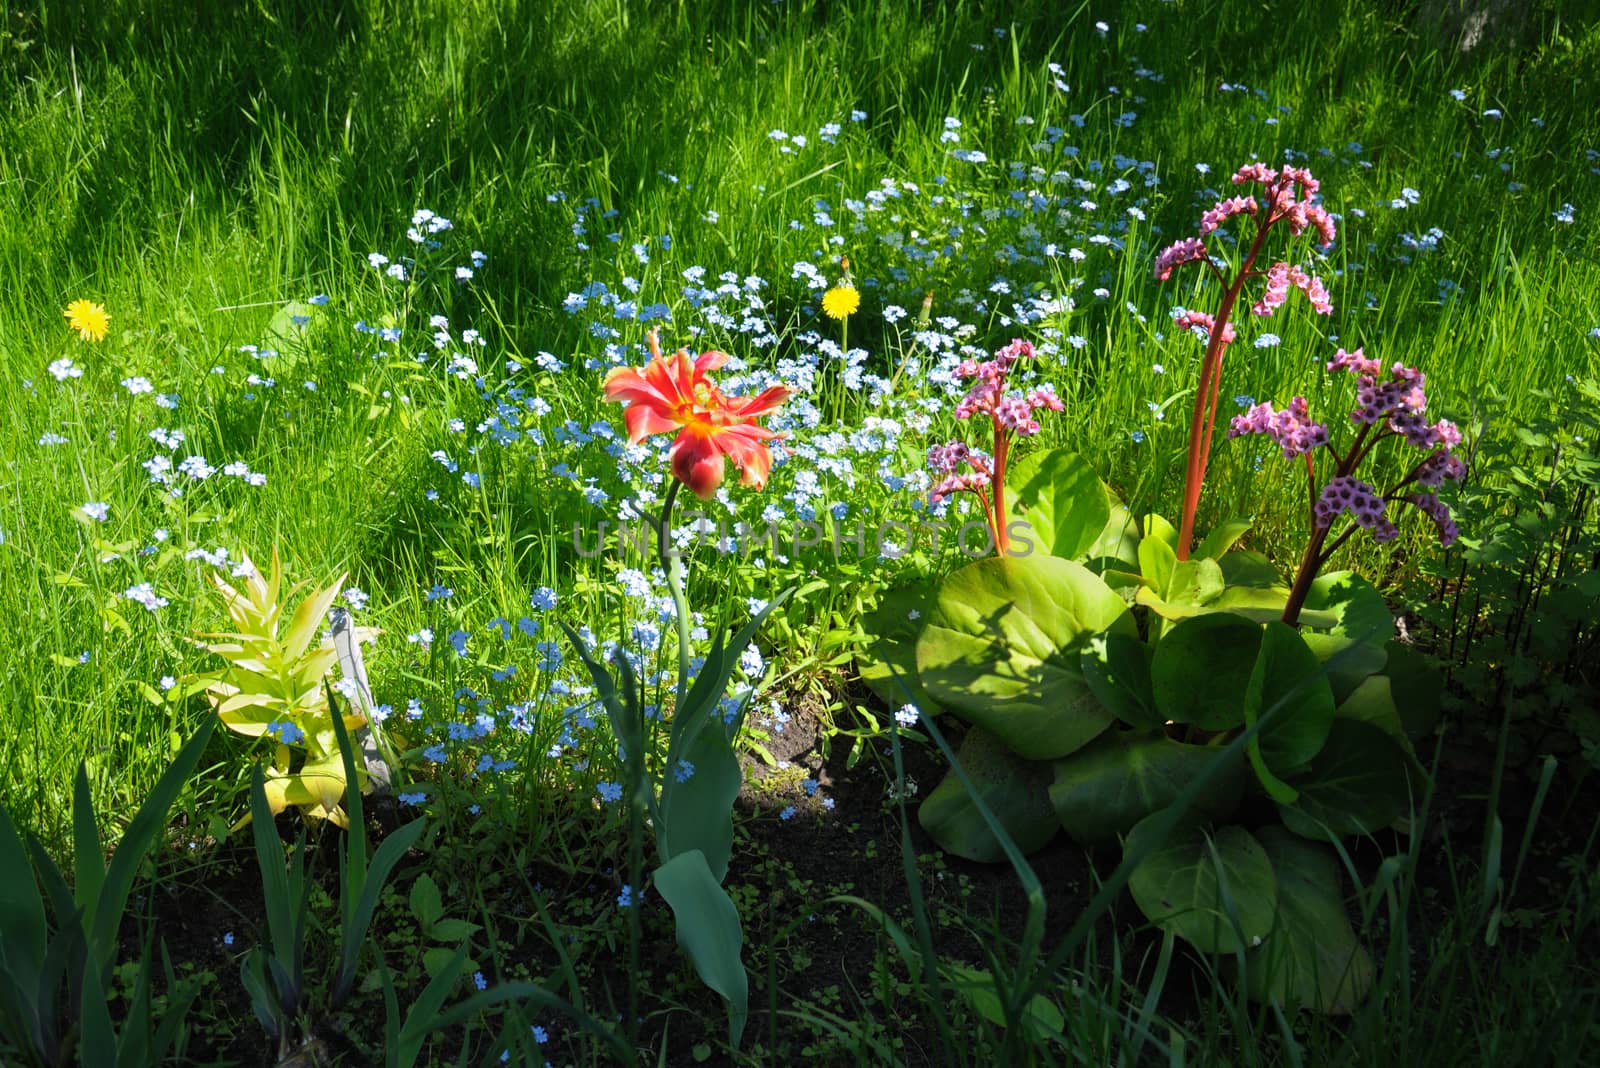 The group of different spring flowers on a green grass background